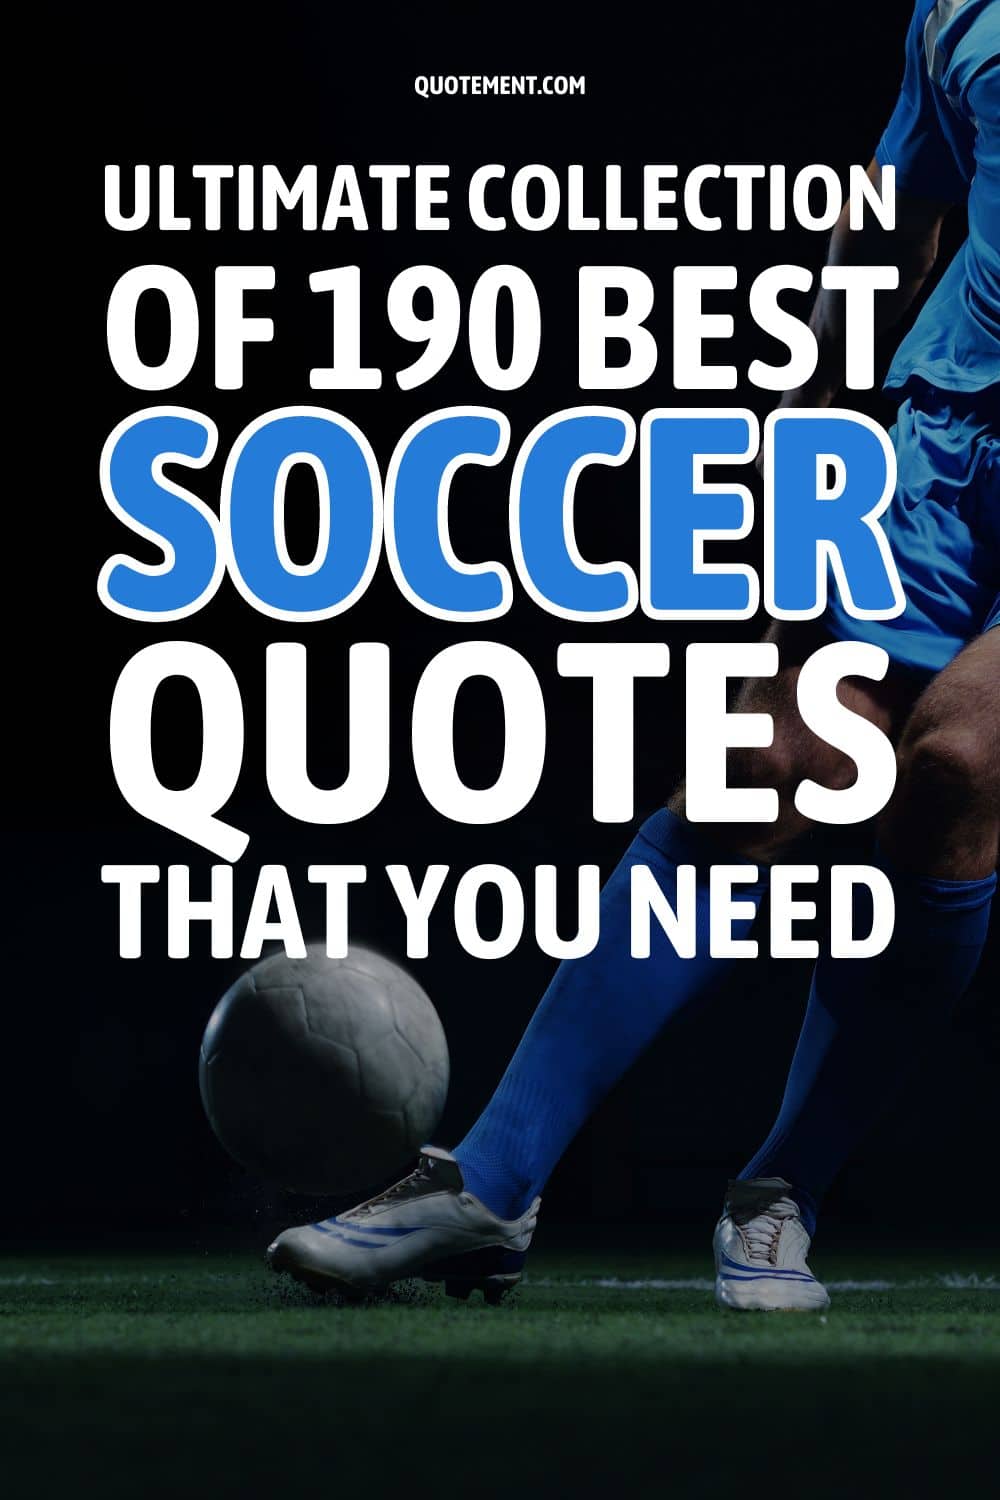 Ultimate Collection Of 190 Best Soccer Quotes That You Need
